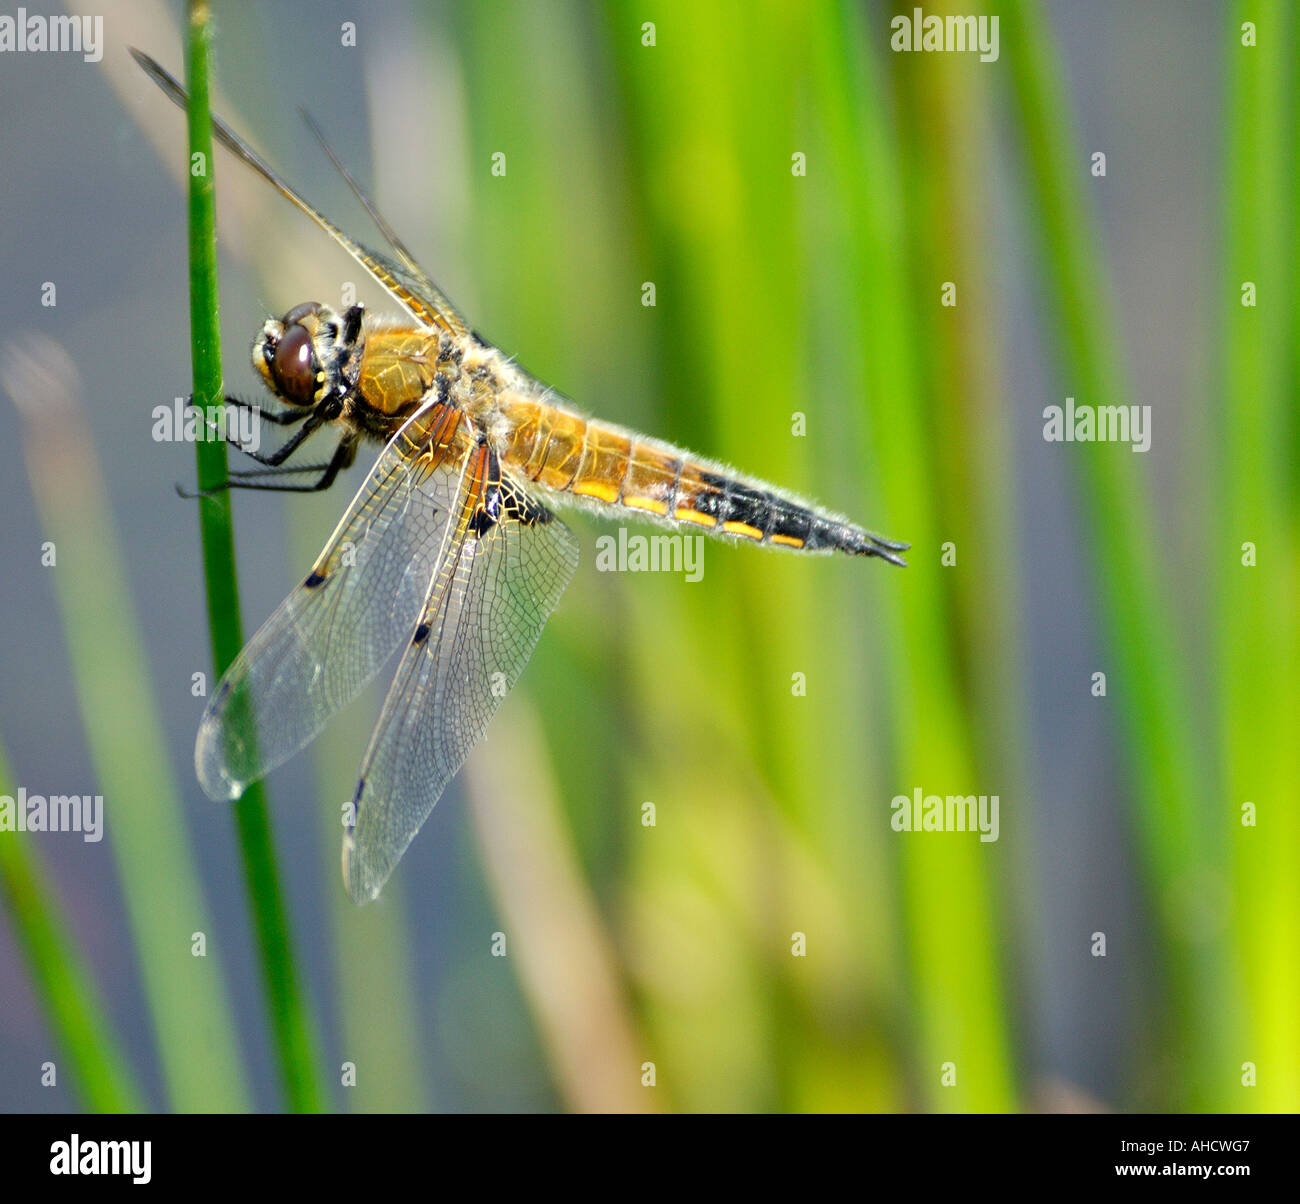 Classic side view of Four Spotted Chaser Libellula quadrimaculata settled on single grass stem with nicely blurred background Stock Photo